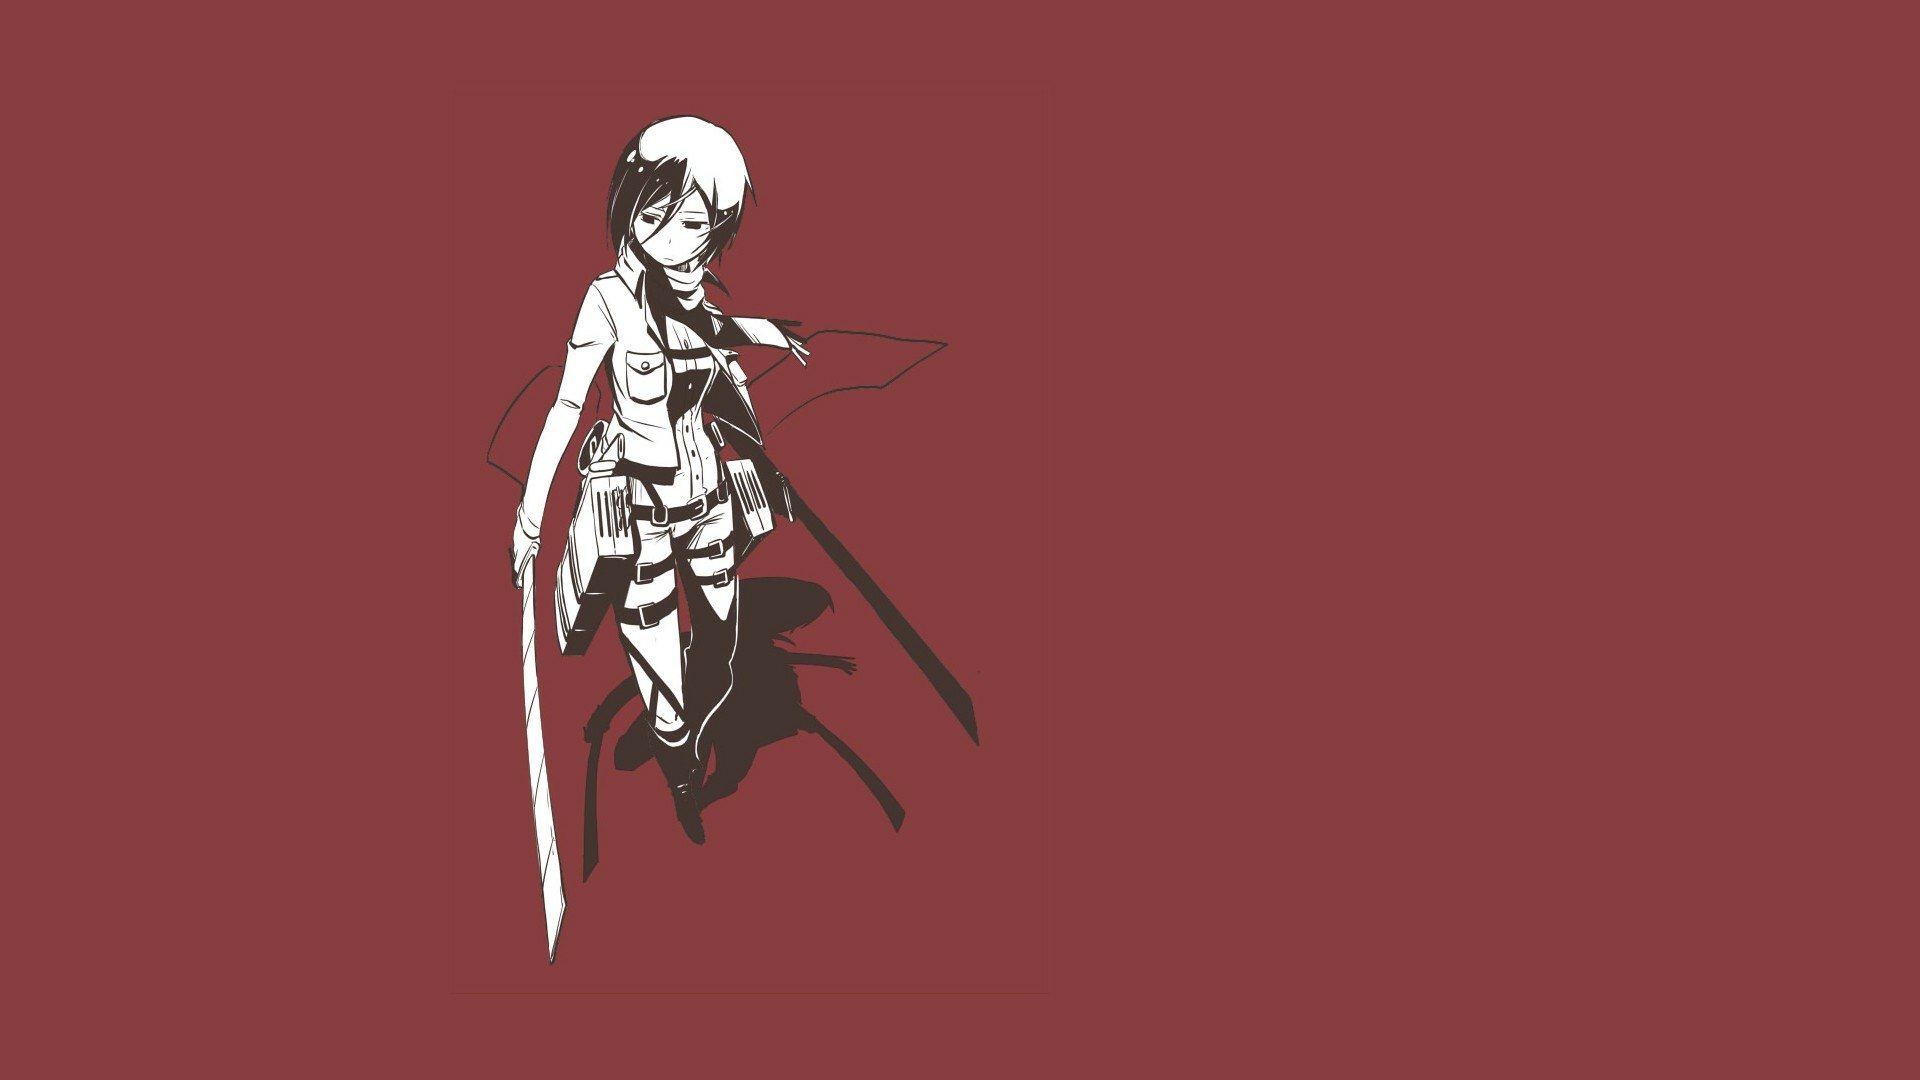 Attack On Titan Full HD Wallpaper and Background Image | 1920x1080 | ID:463606